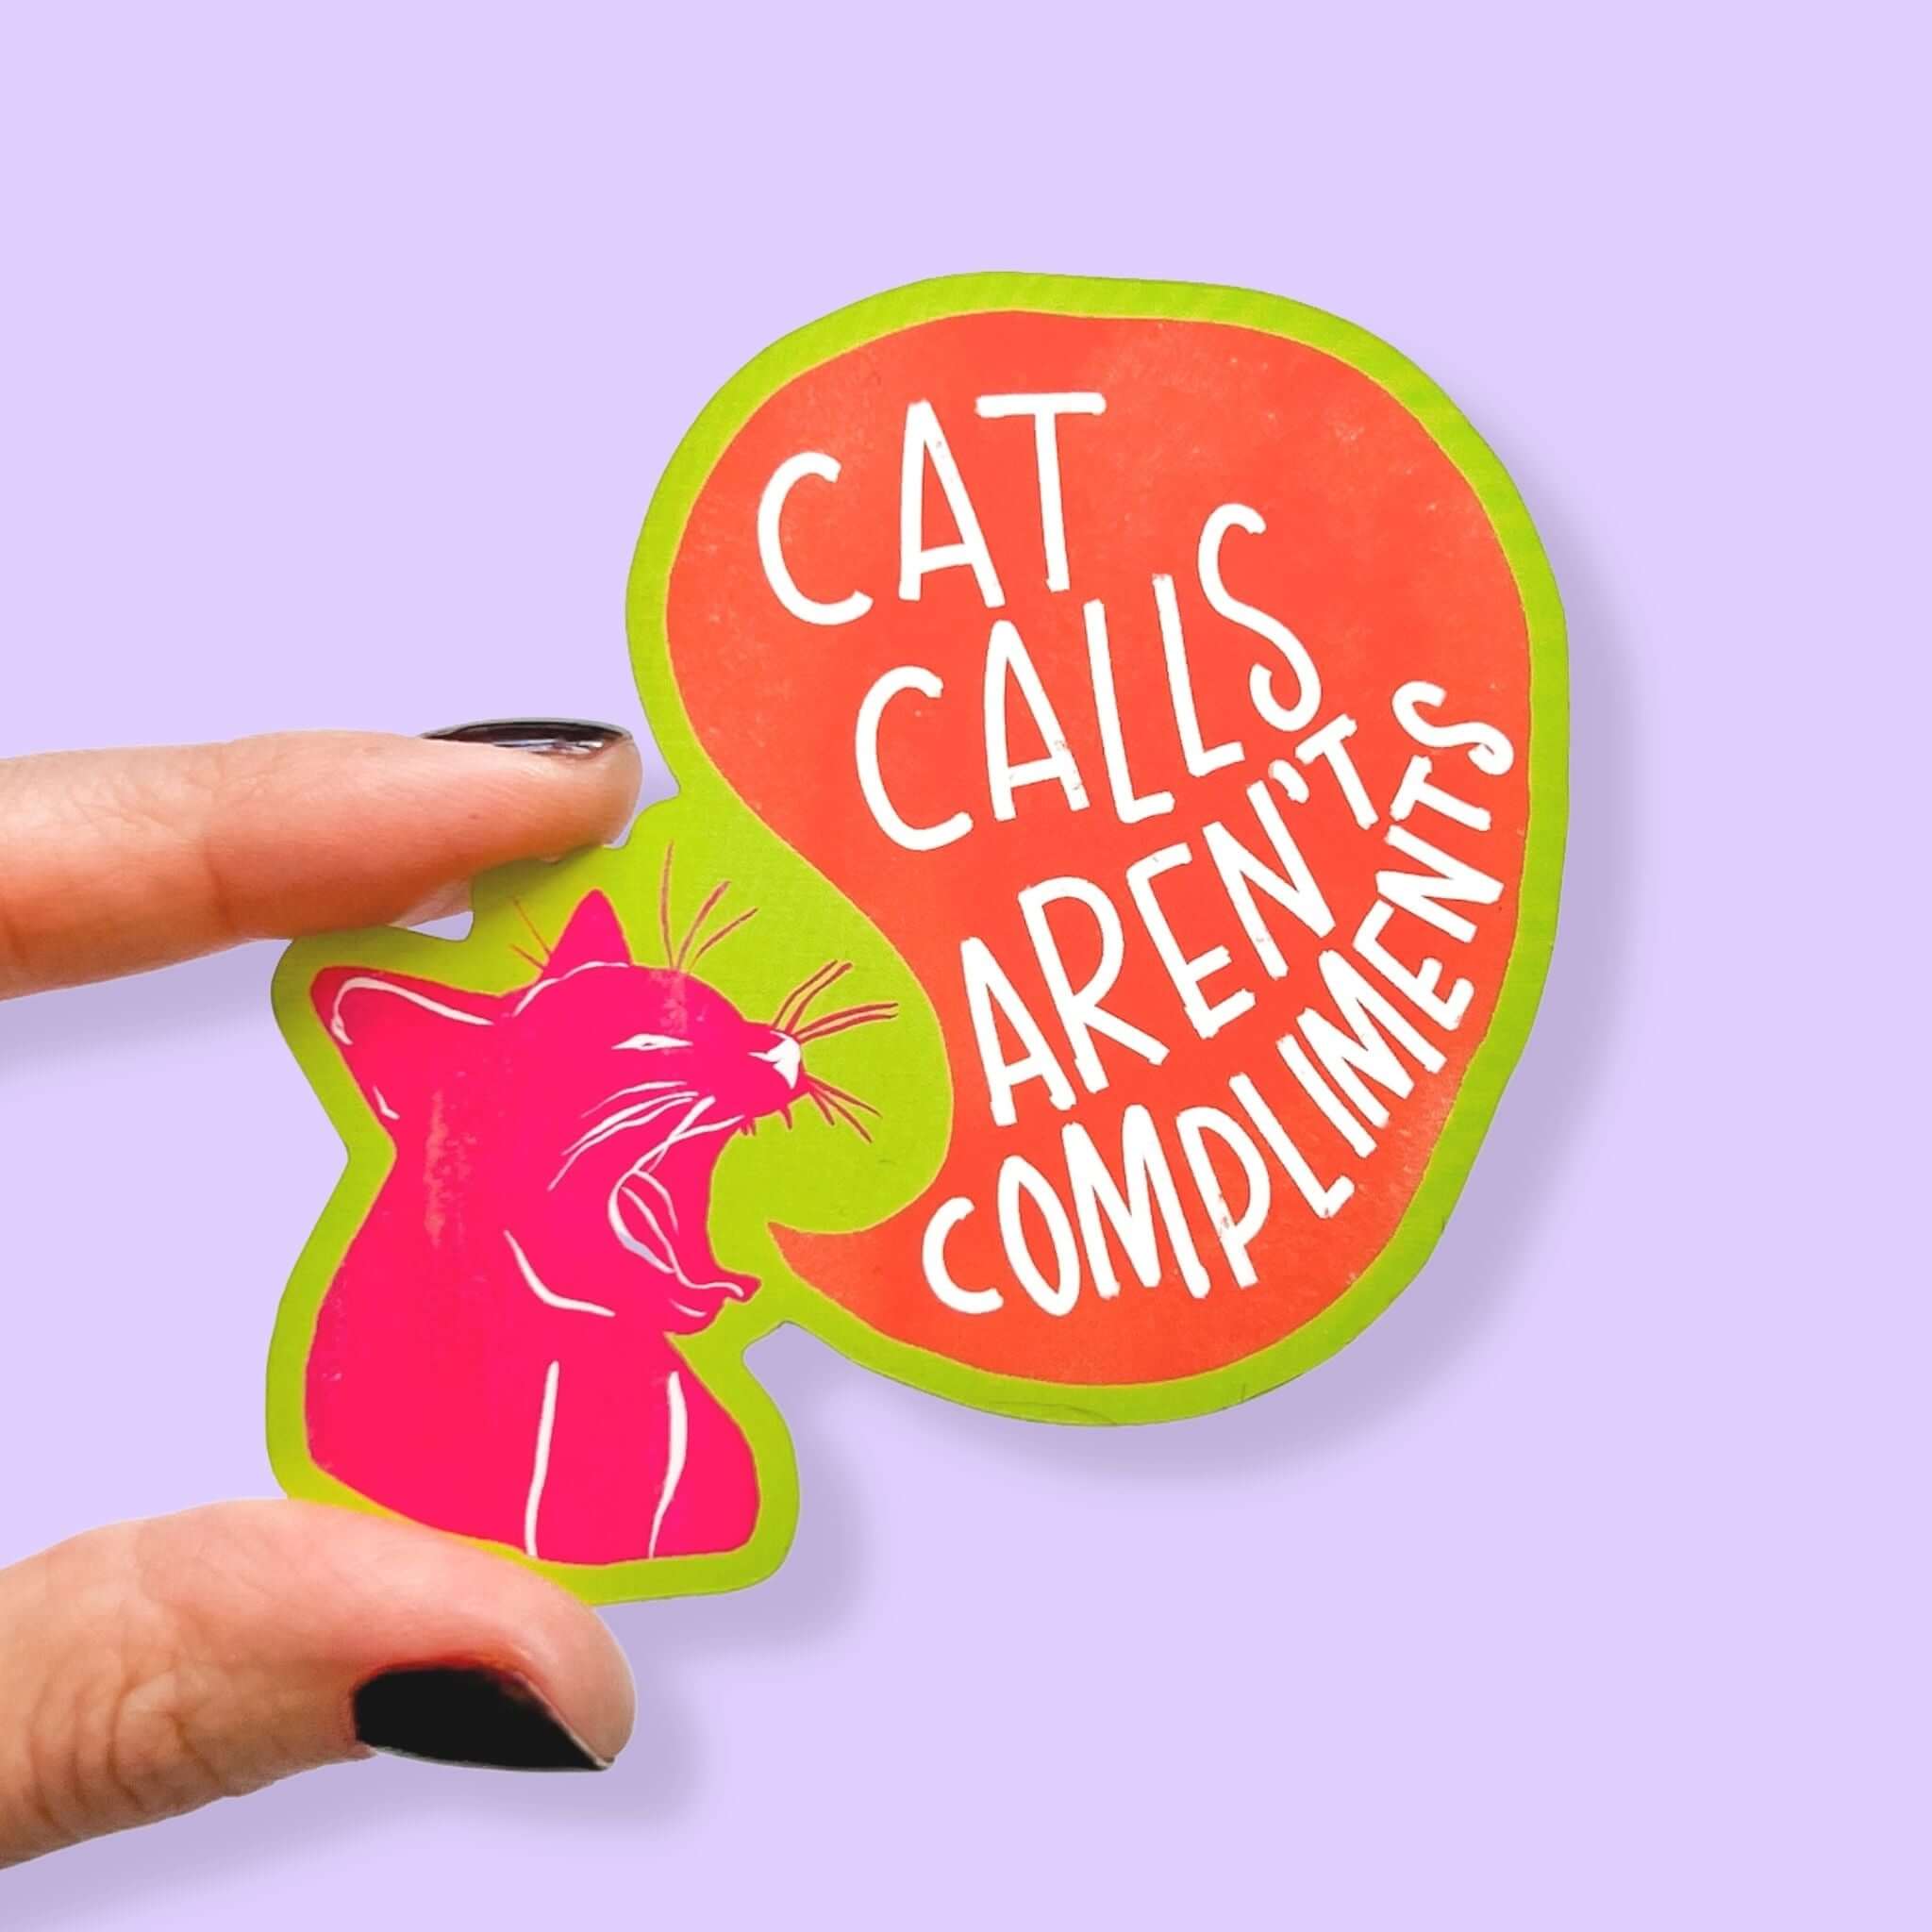 Vinyl sticker of a cat with a quote